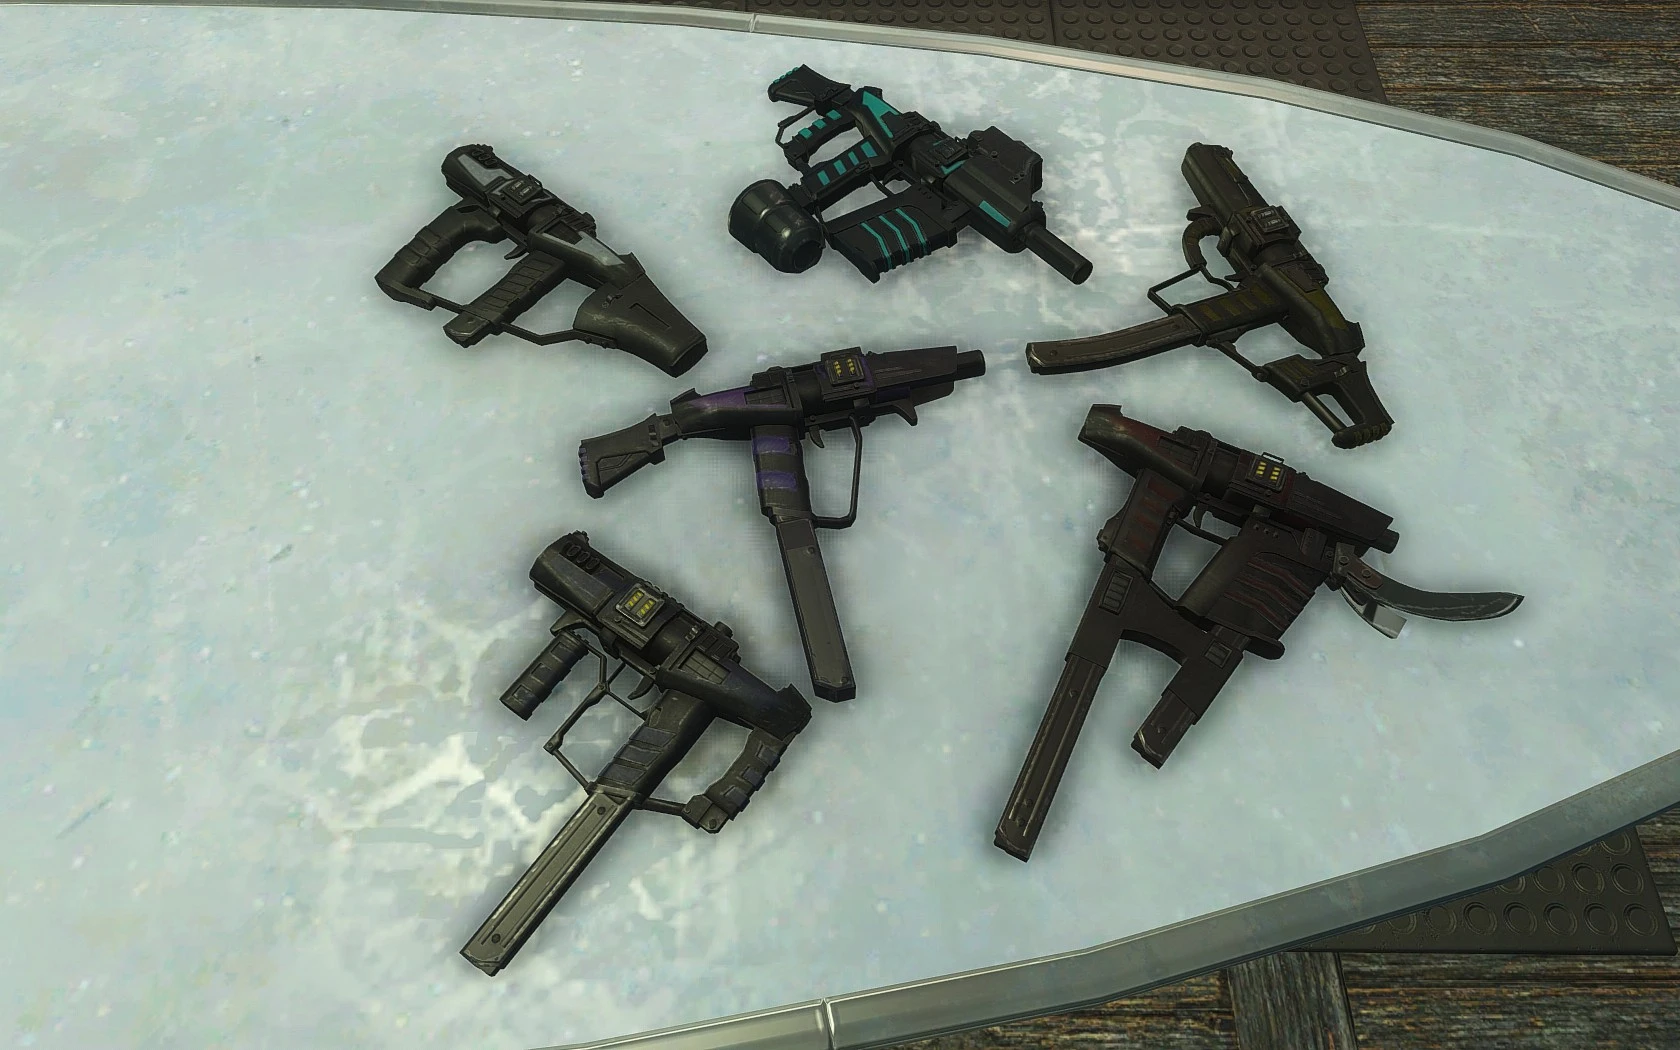 Holstered weapons fallout 4 фото 42